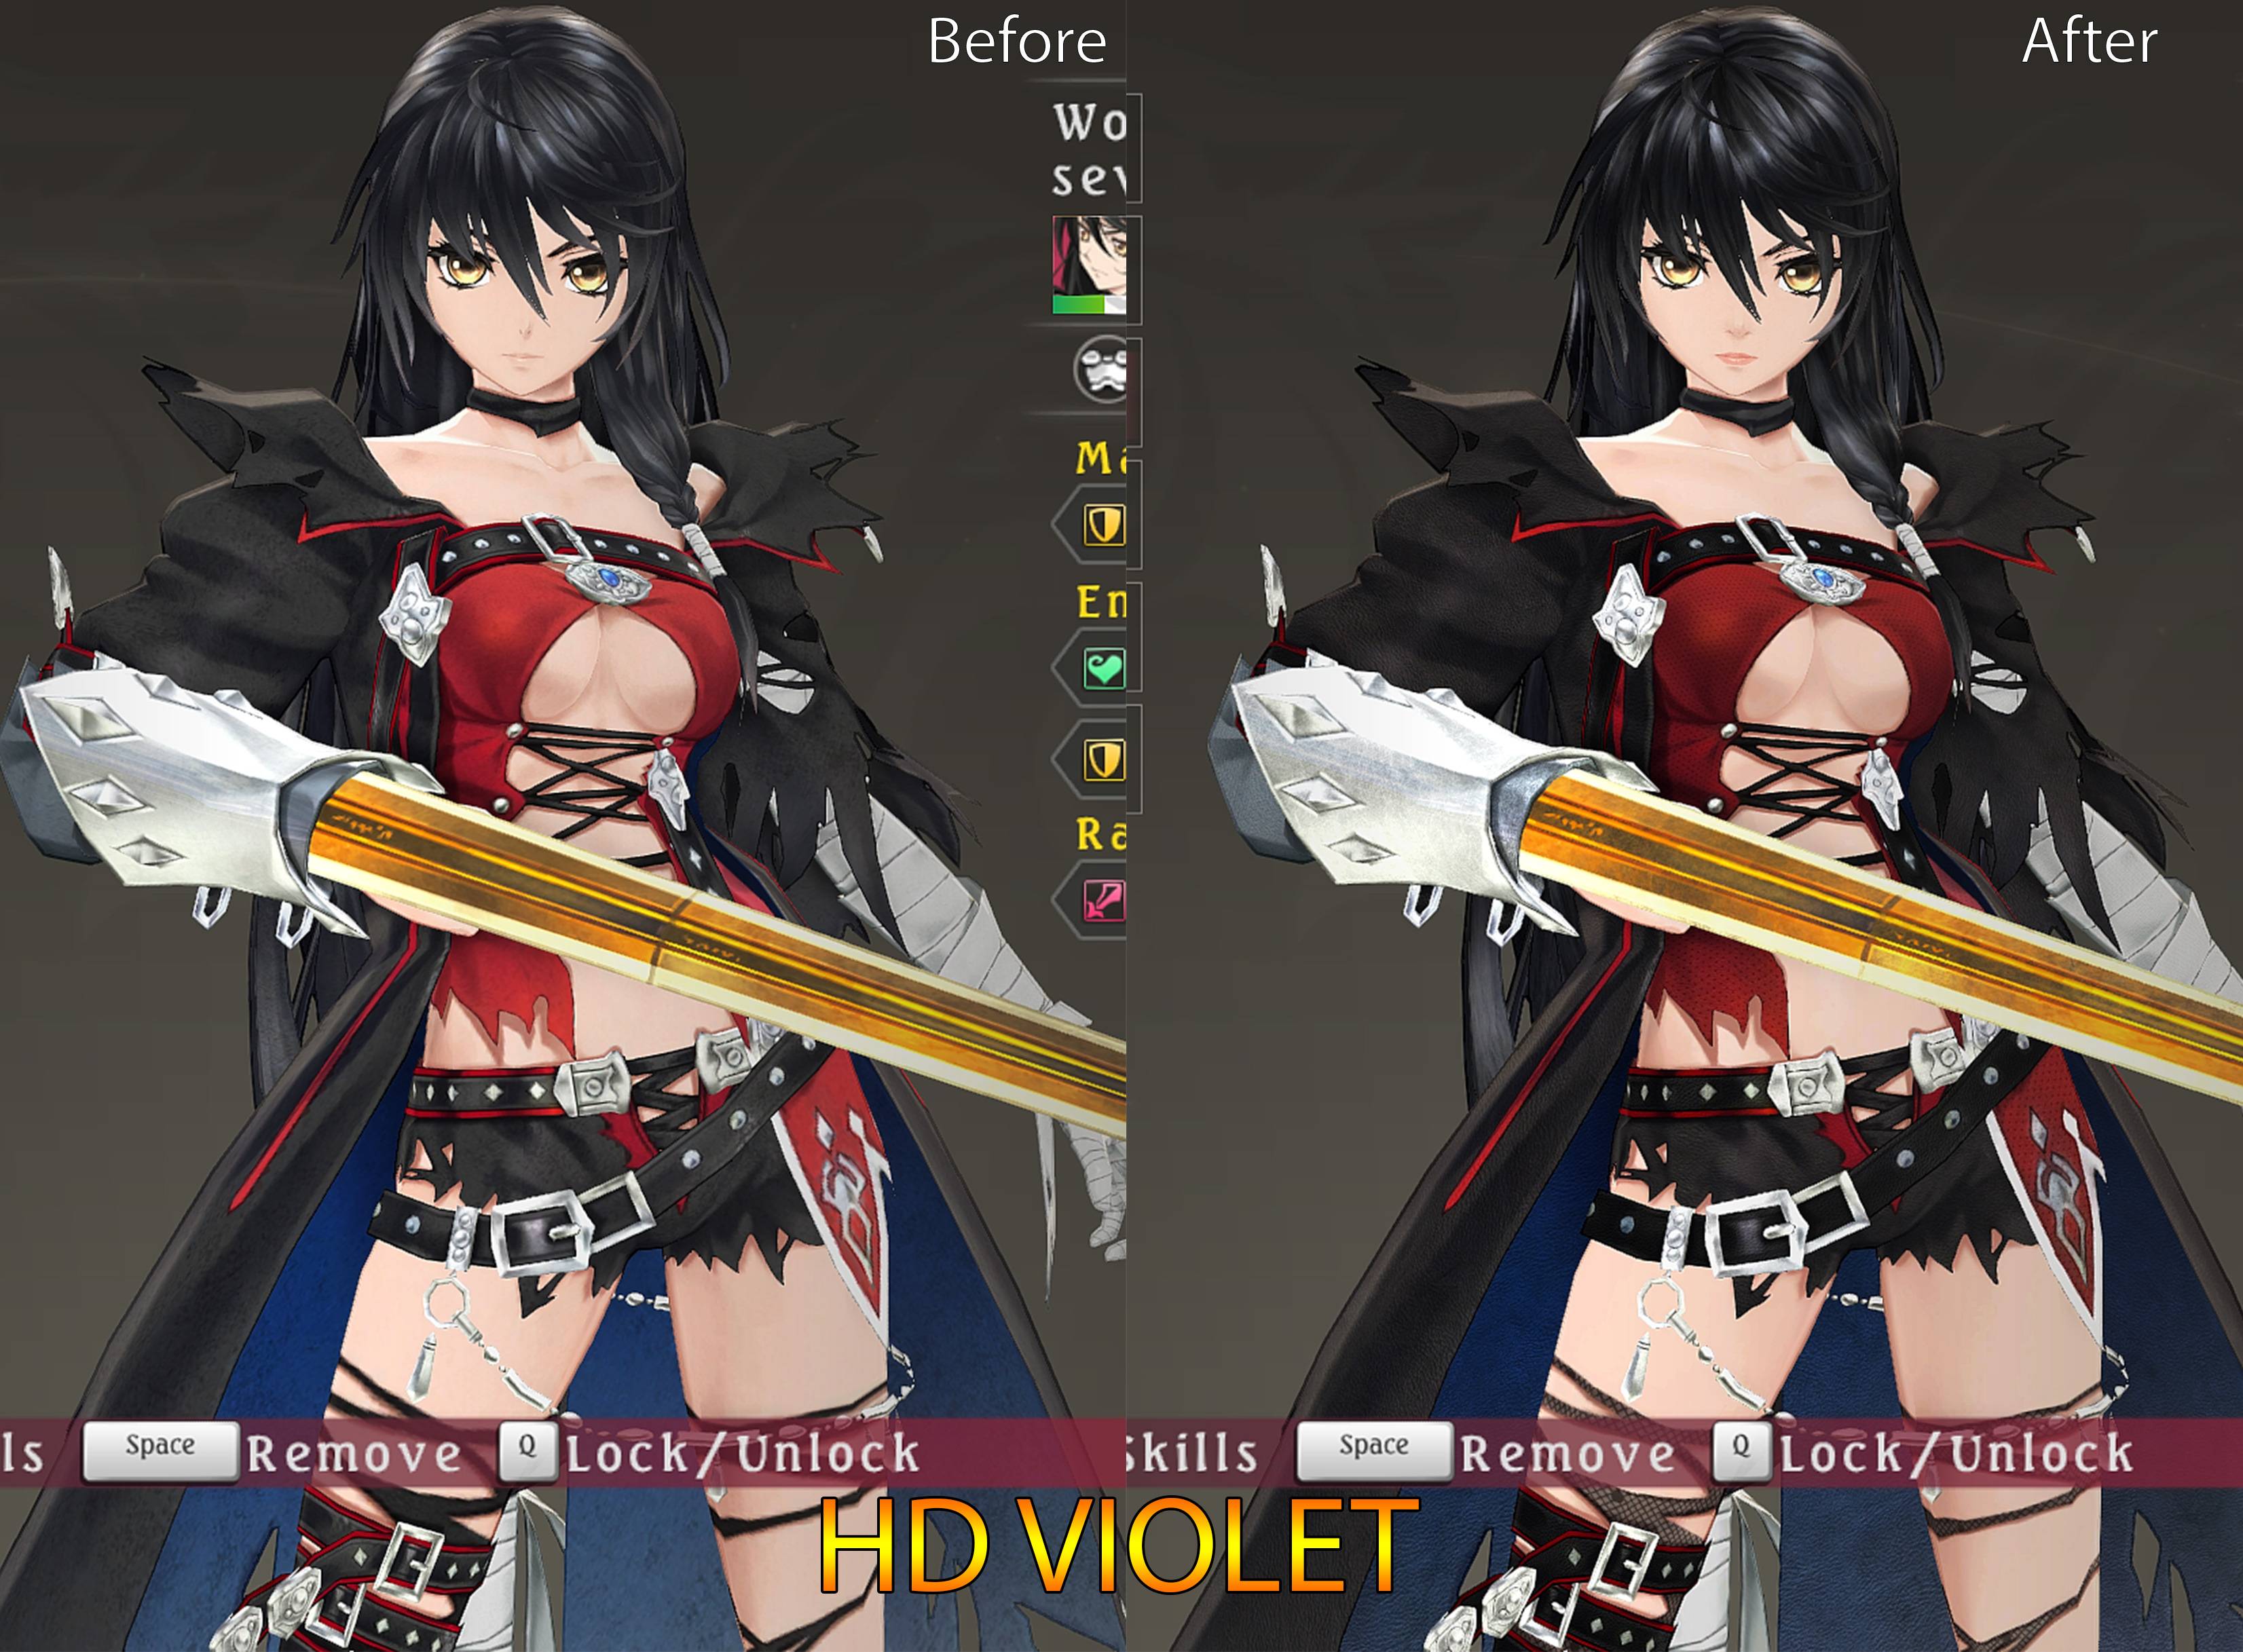 adam howat recommends tales of berseria nude mod pic